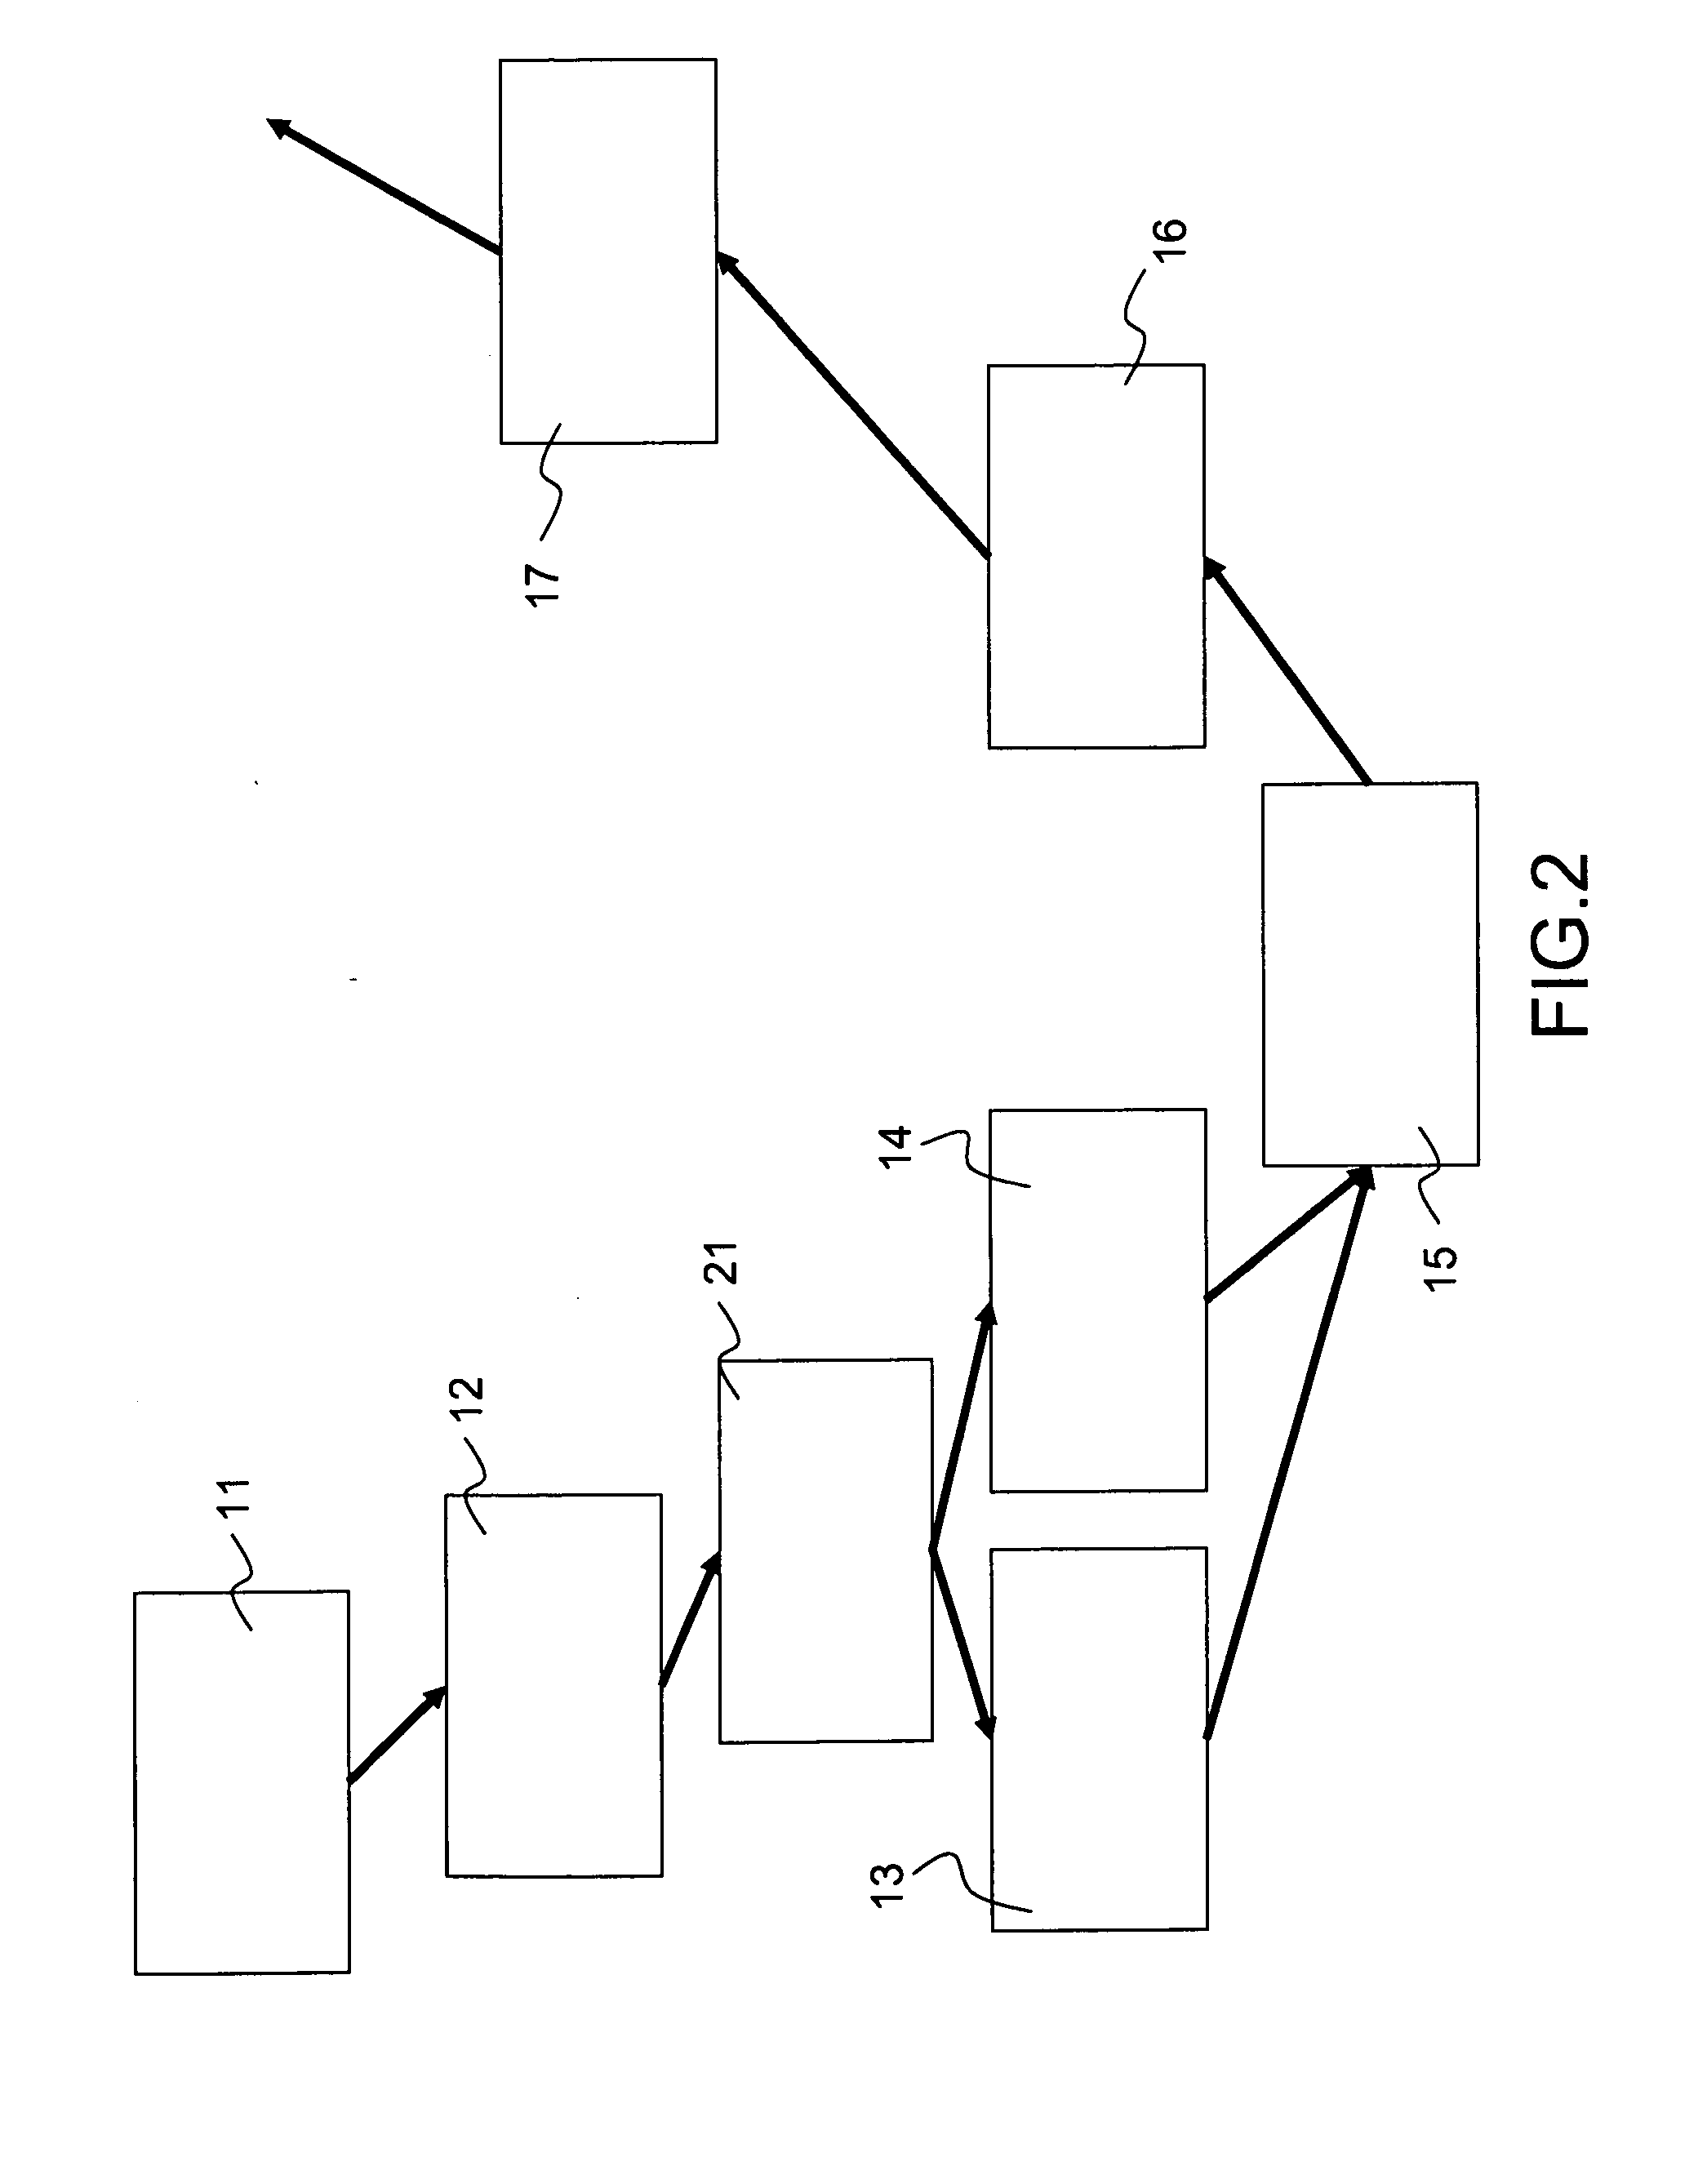 Method of designing a system comprising hardware and software components